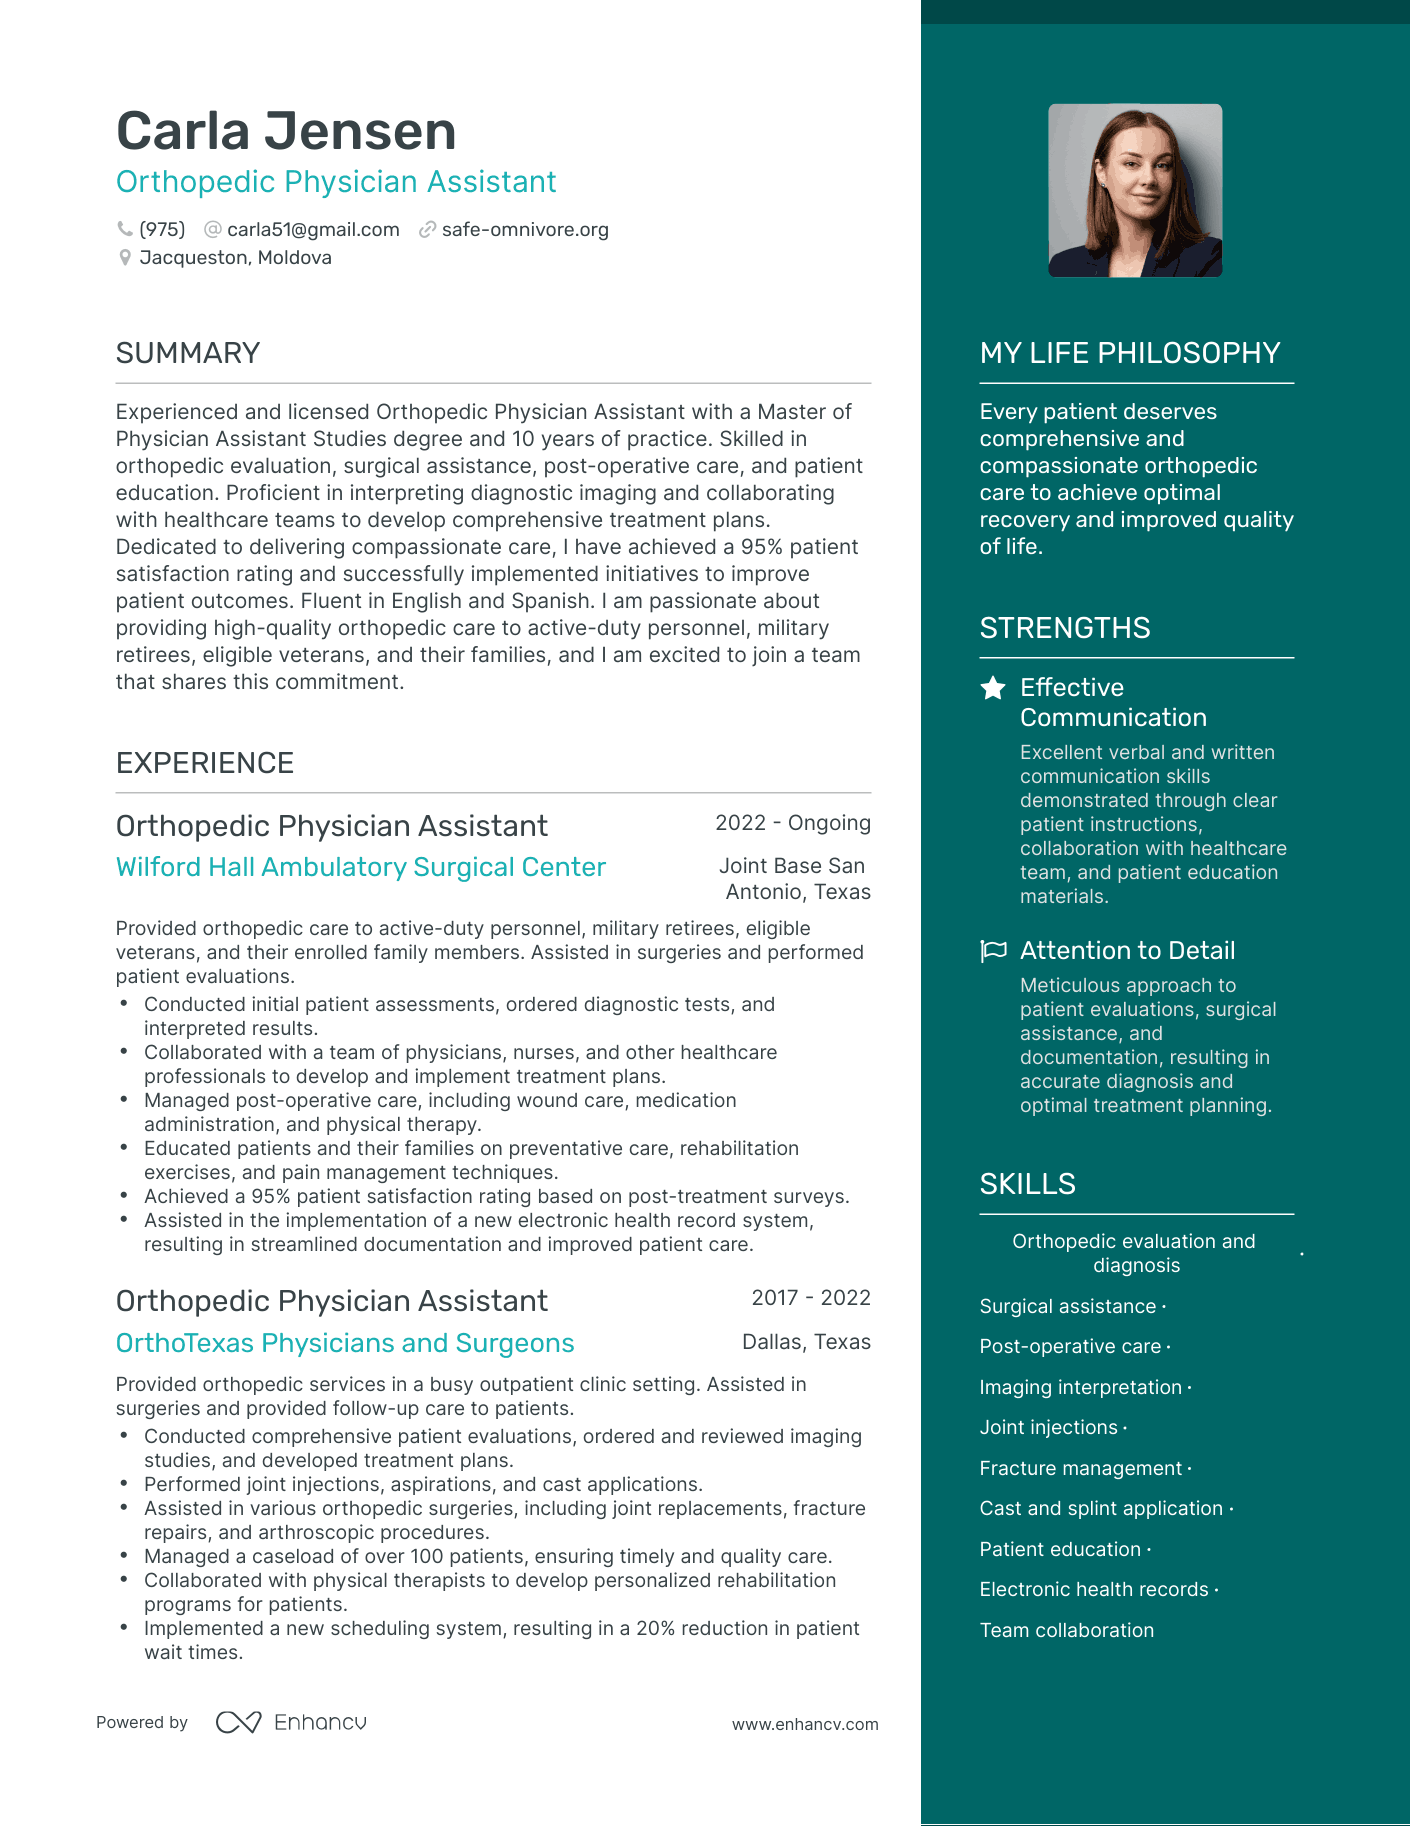 Orthopedic Physician Assistant resume example